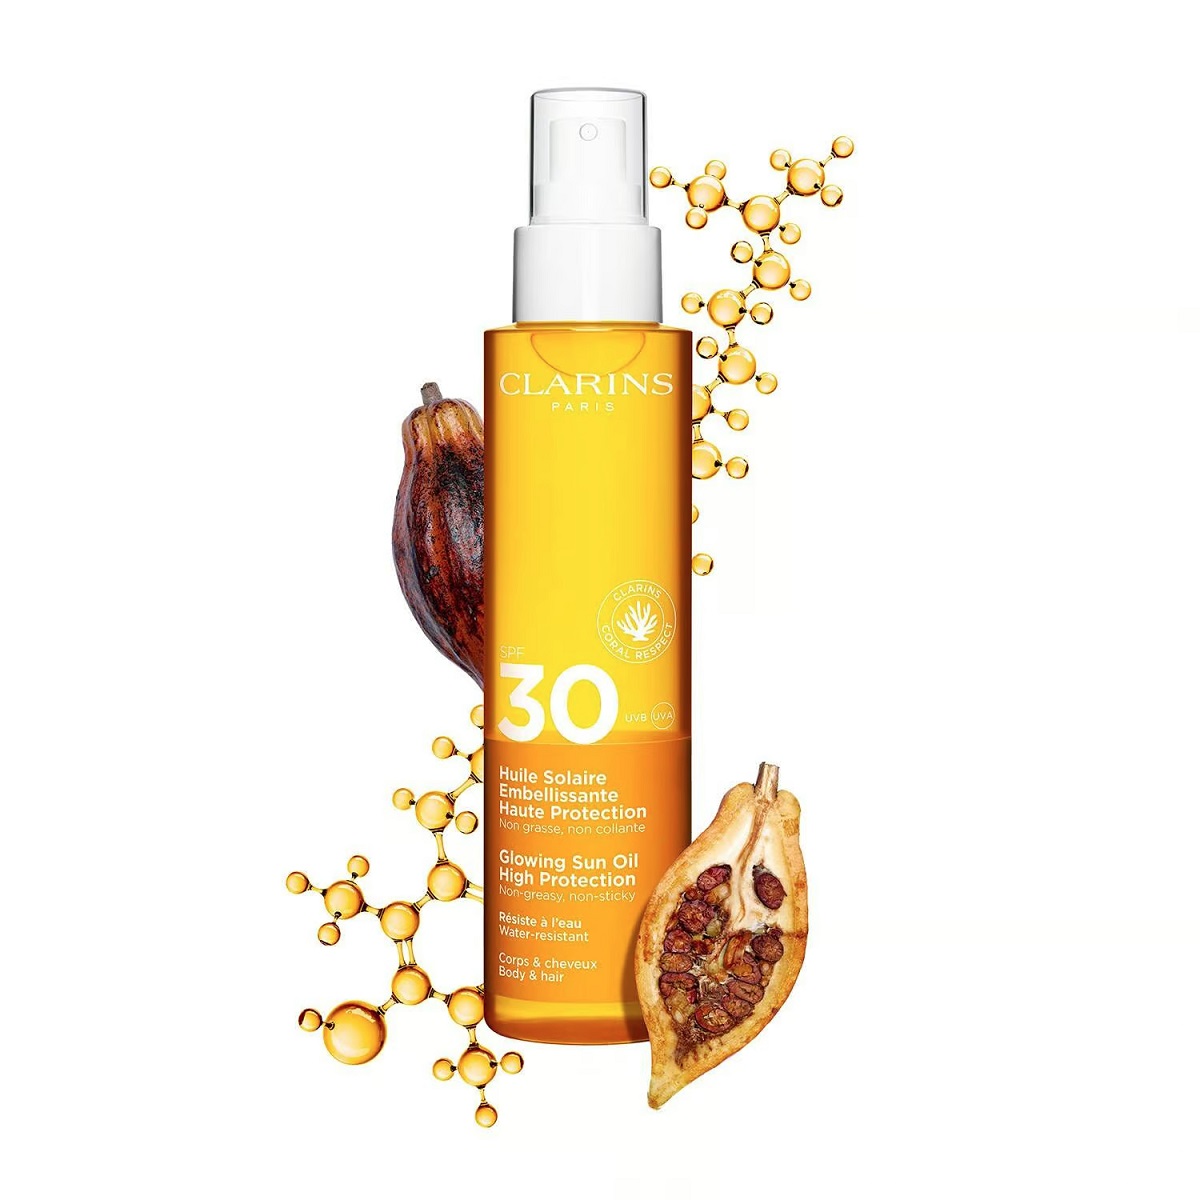 CLARINS Glowing Sun Oil High Protection SPF30